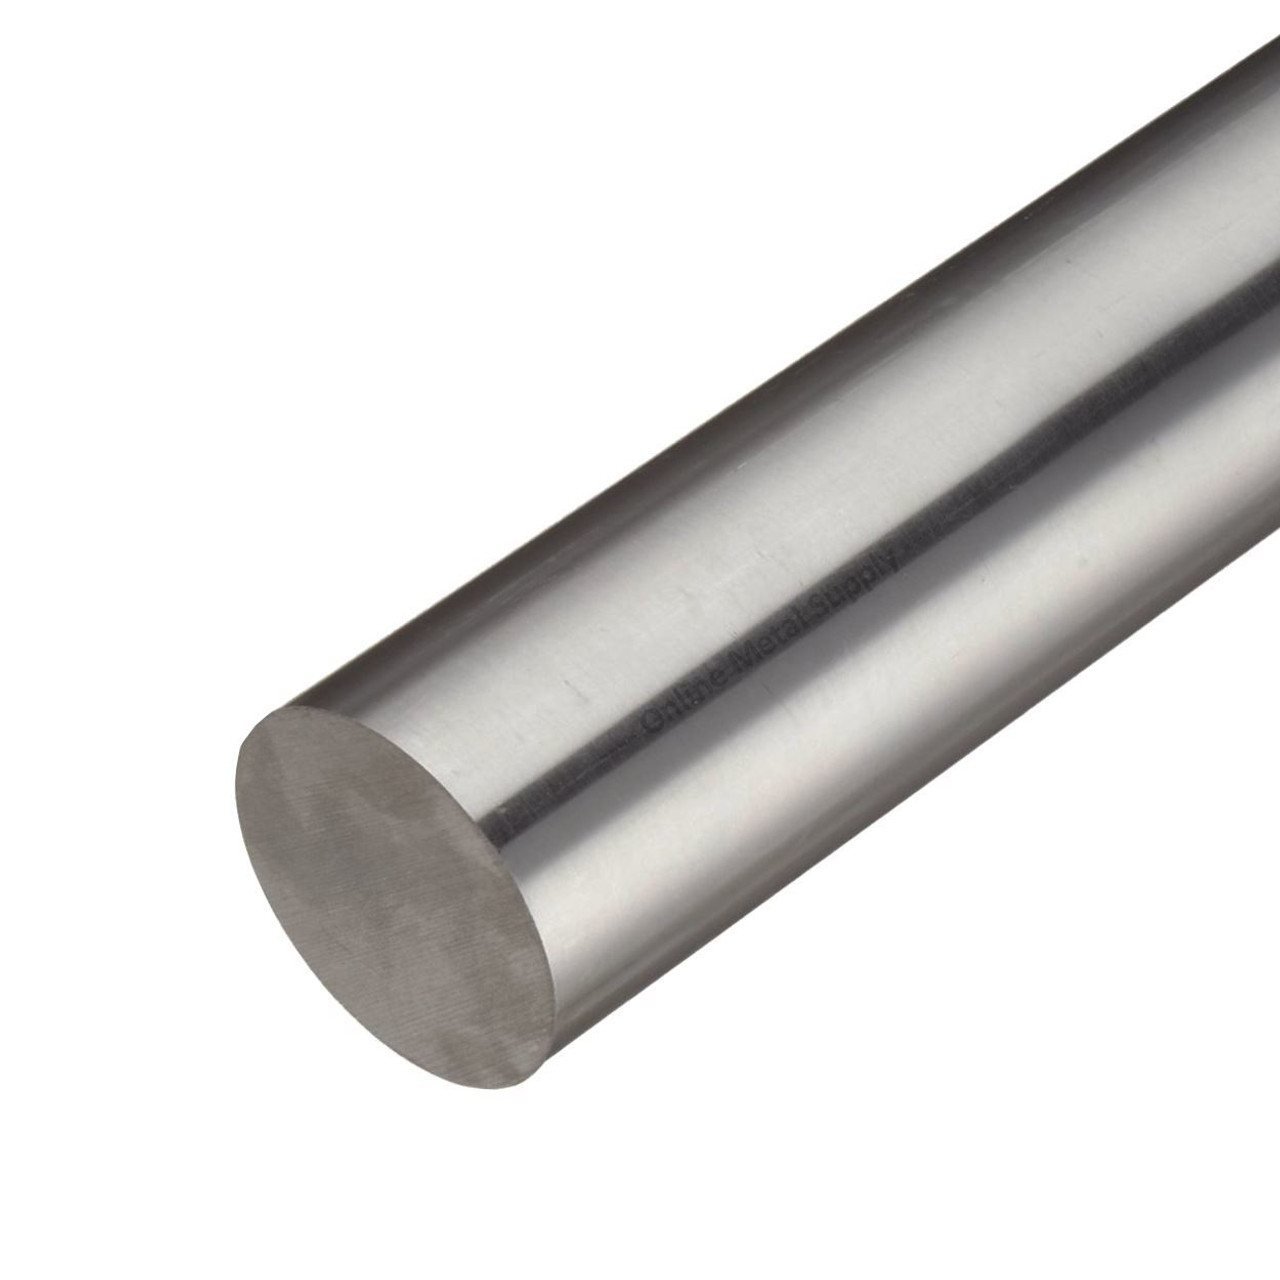 1.687 (1-11/16 inch) x 16 inches, 416 Stainless Steel Round Rod, Cold Finished